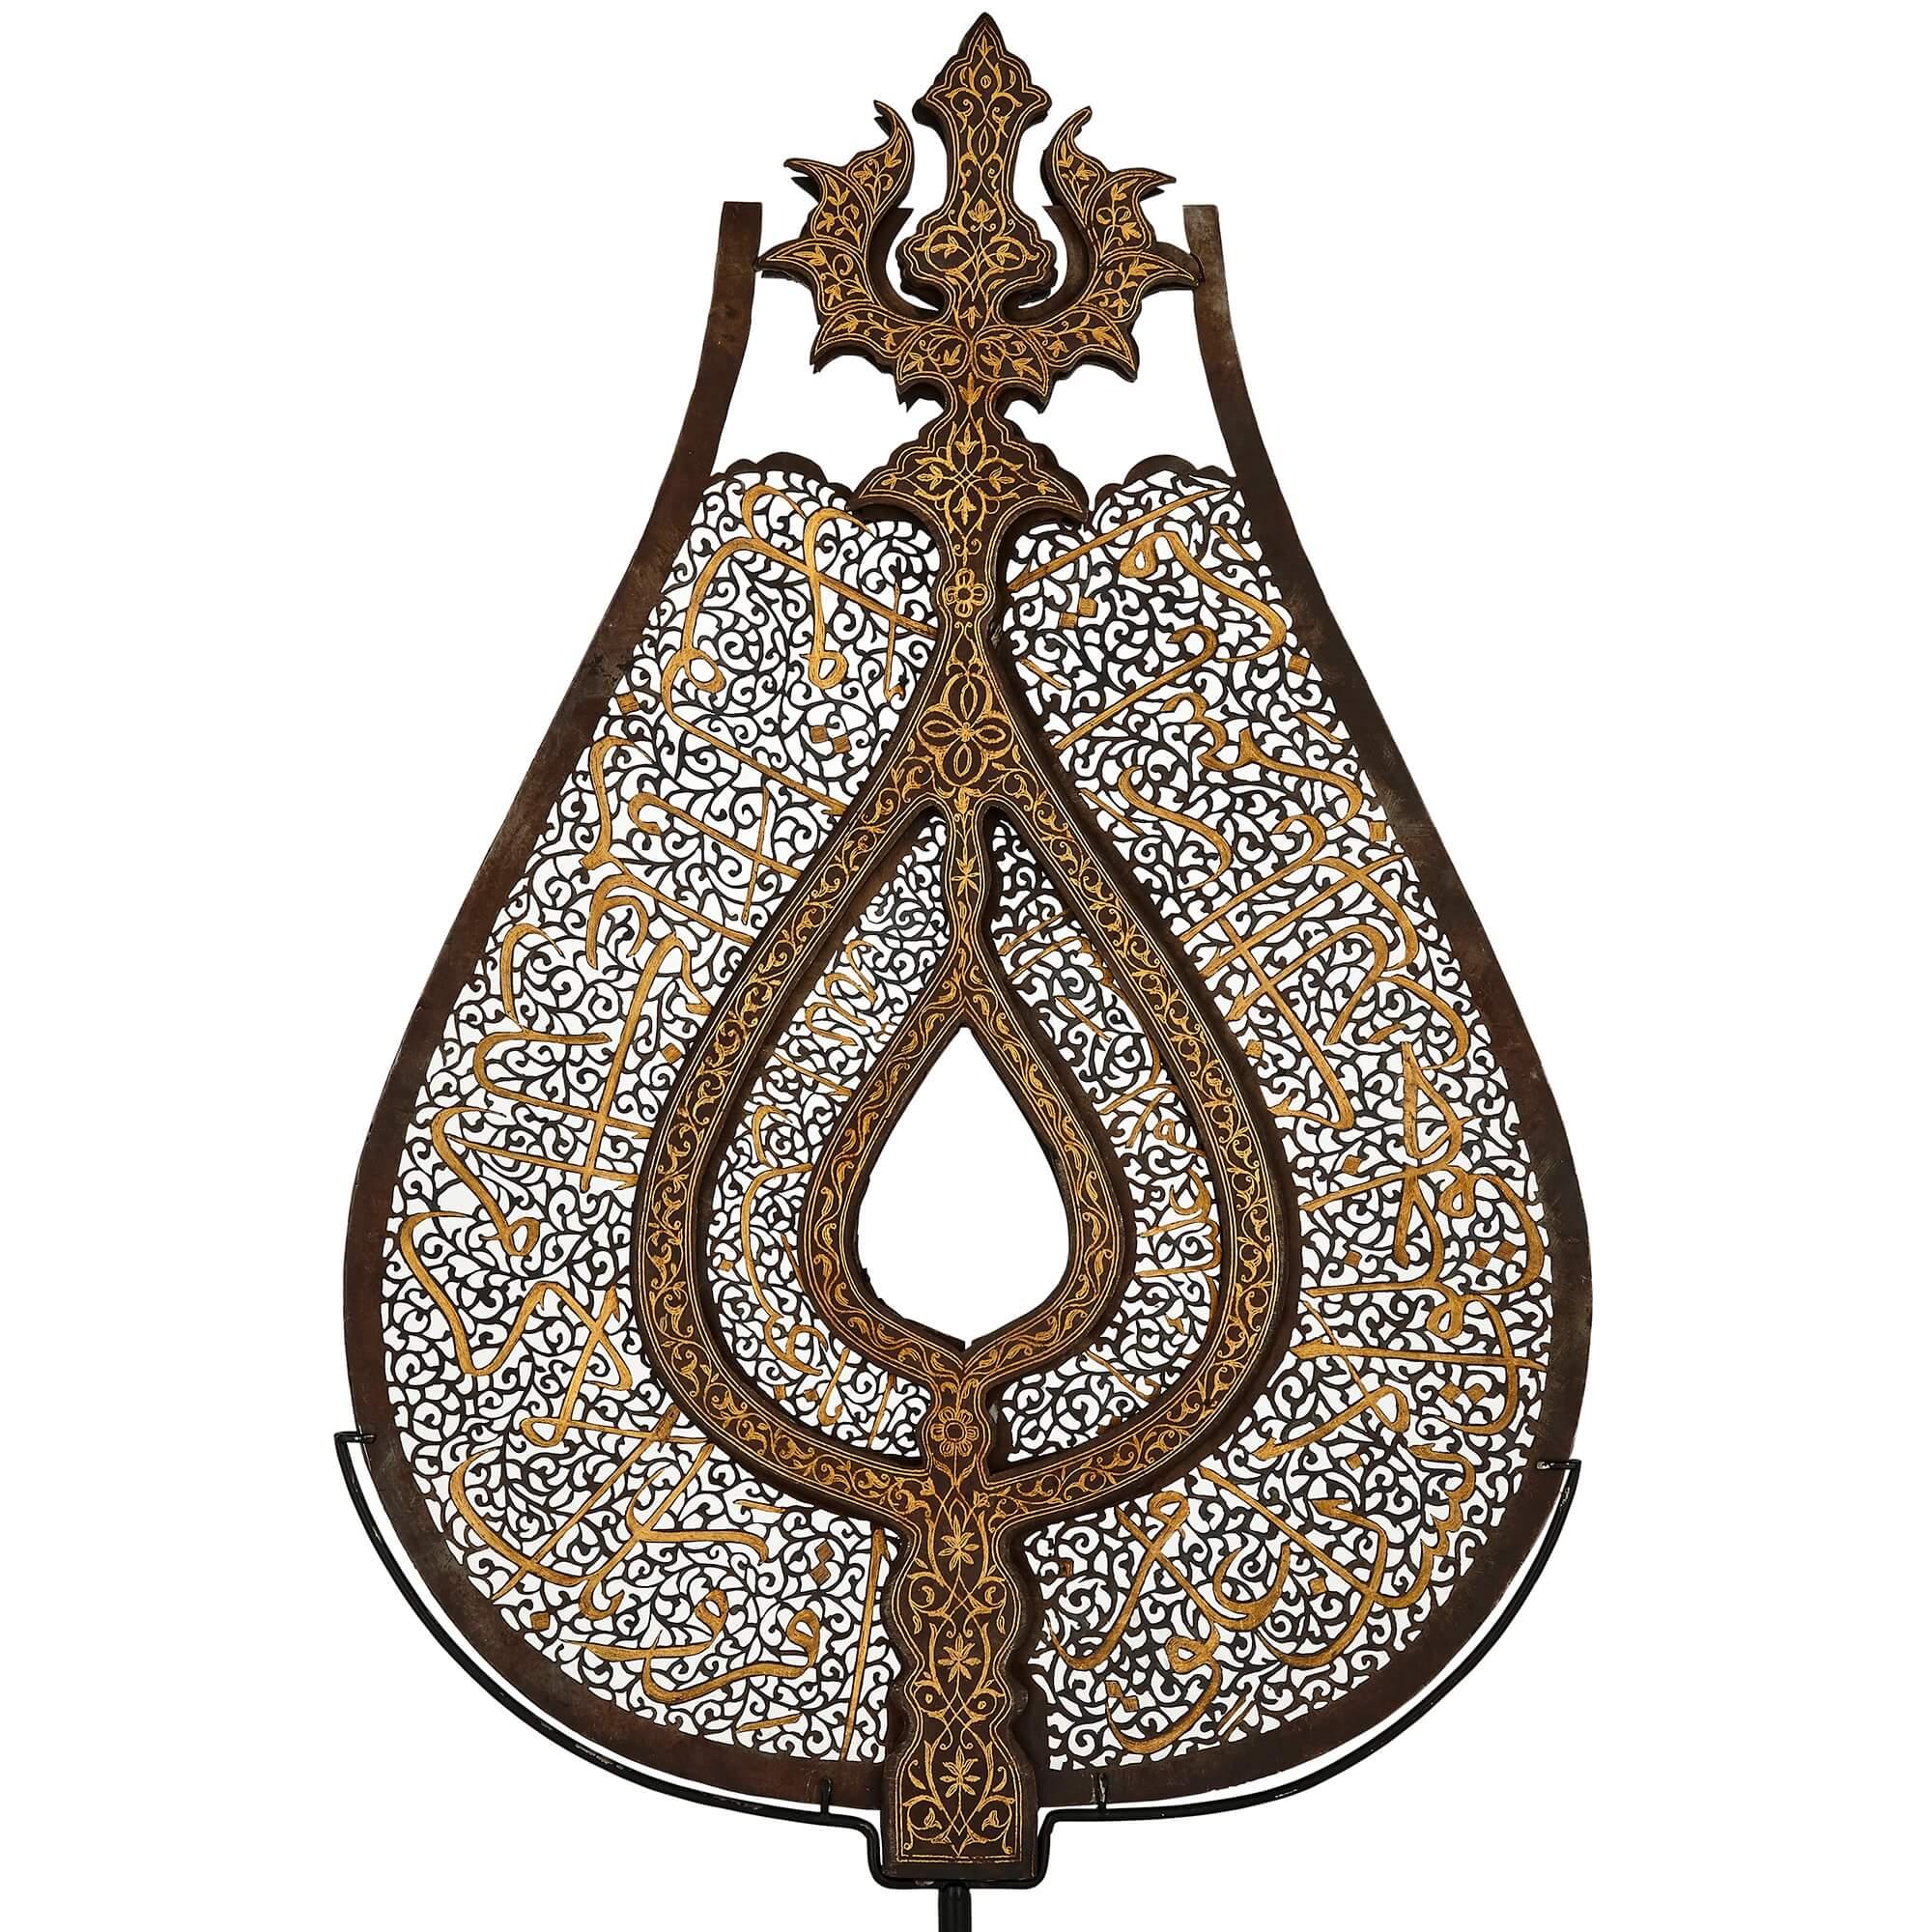 Very large Persian pierced steel Islamic standard damascened with gold
Persian, 19th century
Measures: Height 82cm, width 44cm, depth 10cm

This fine processional standard (known as an ‘Alam) was produced in Qajar period Persia. The standard is